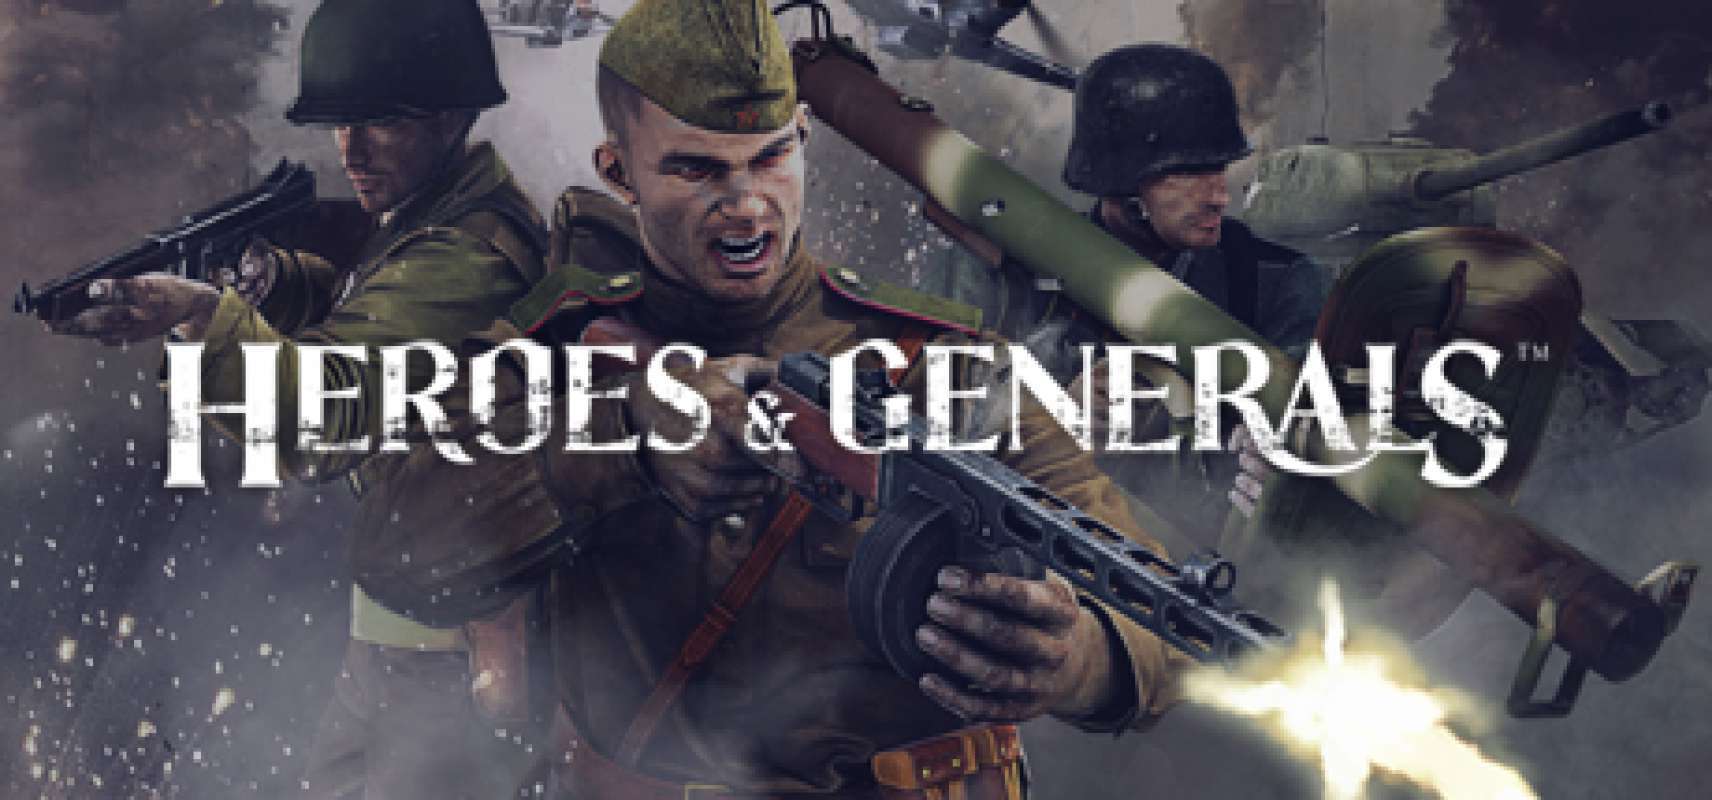 Steam hero and generals фото 34